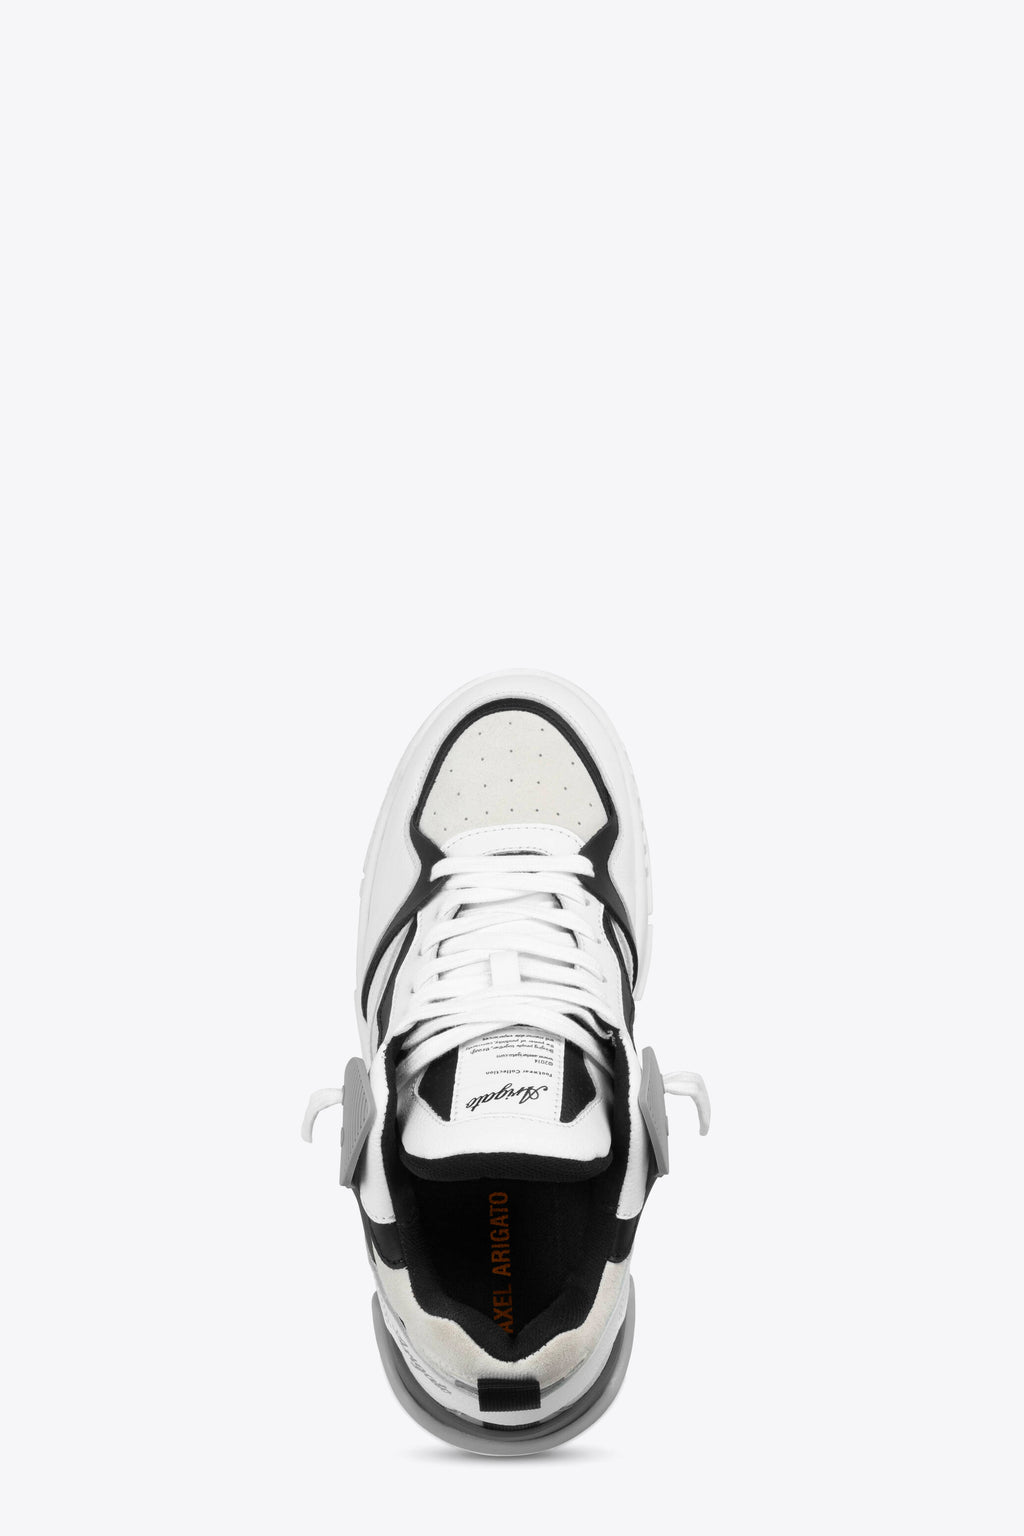 alt-image__White-and-black-leather-90s-style-low-sneaker---Astro-Sneaker-